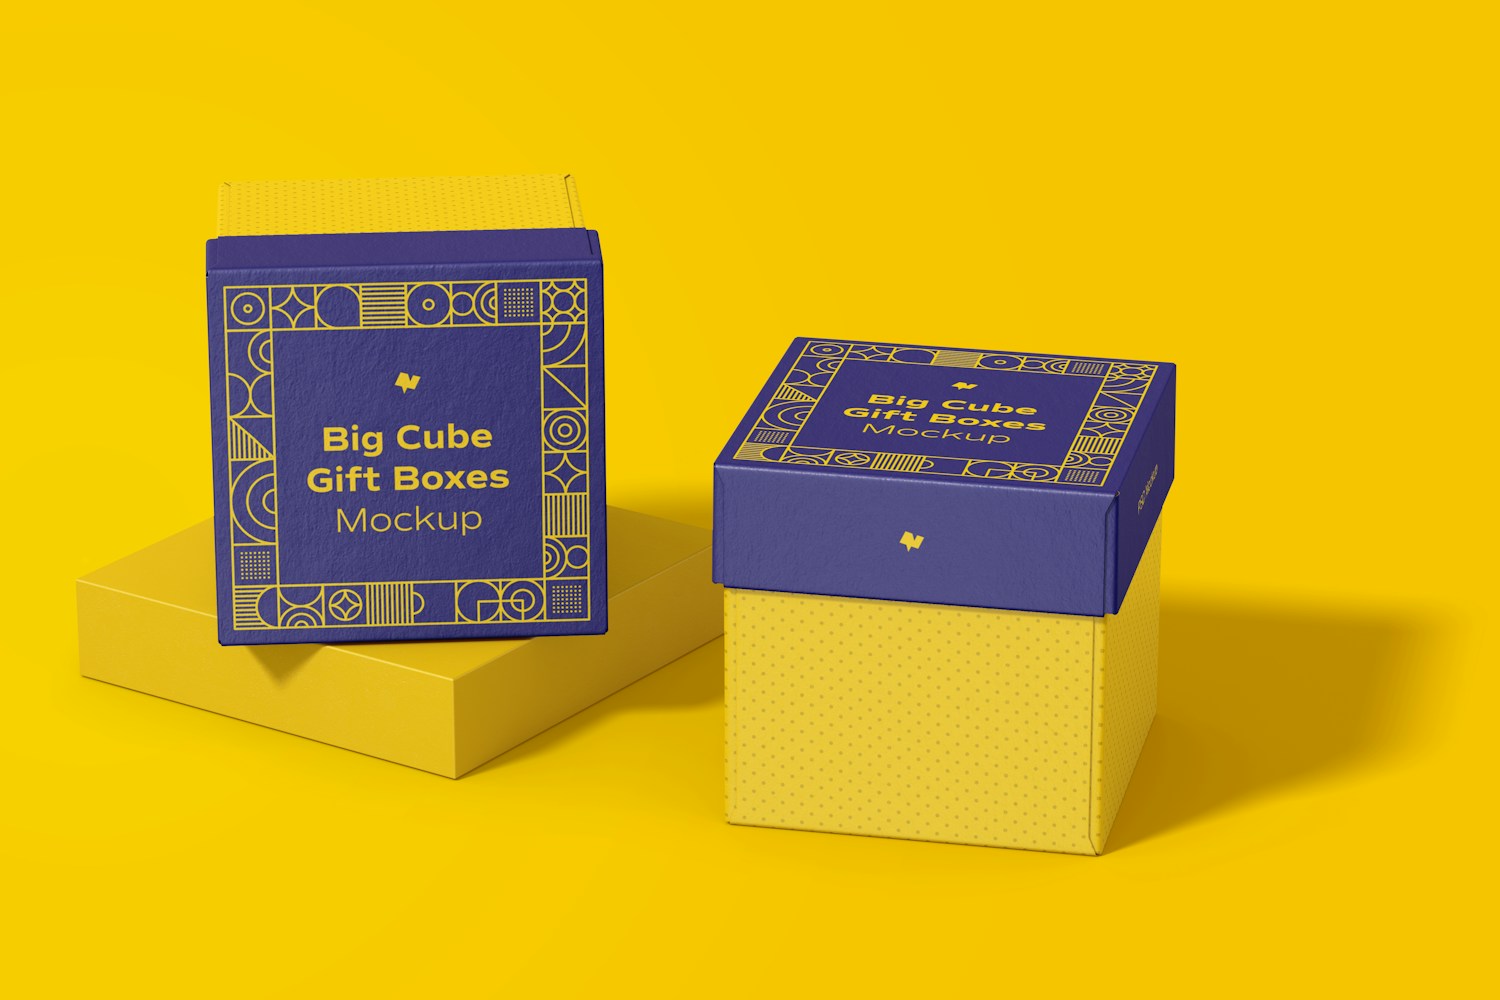 Big Cube Gift Boxes Mockup, Perspective